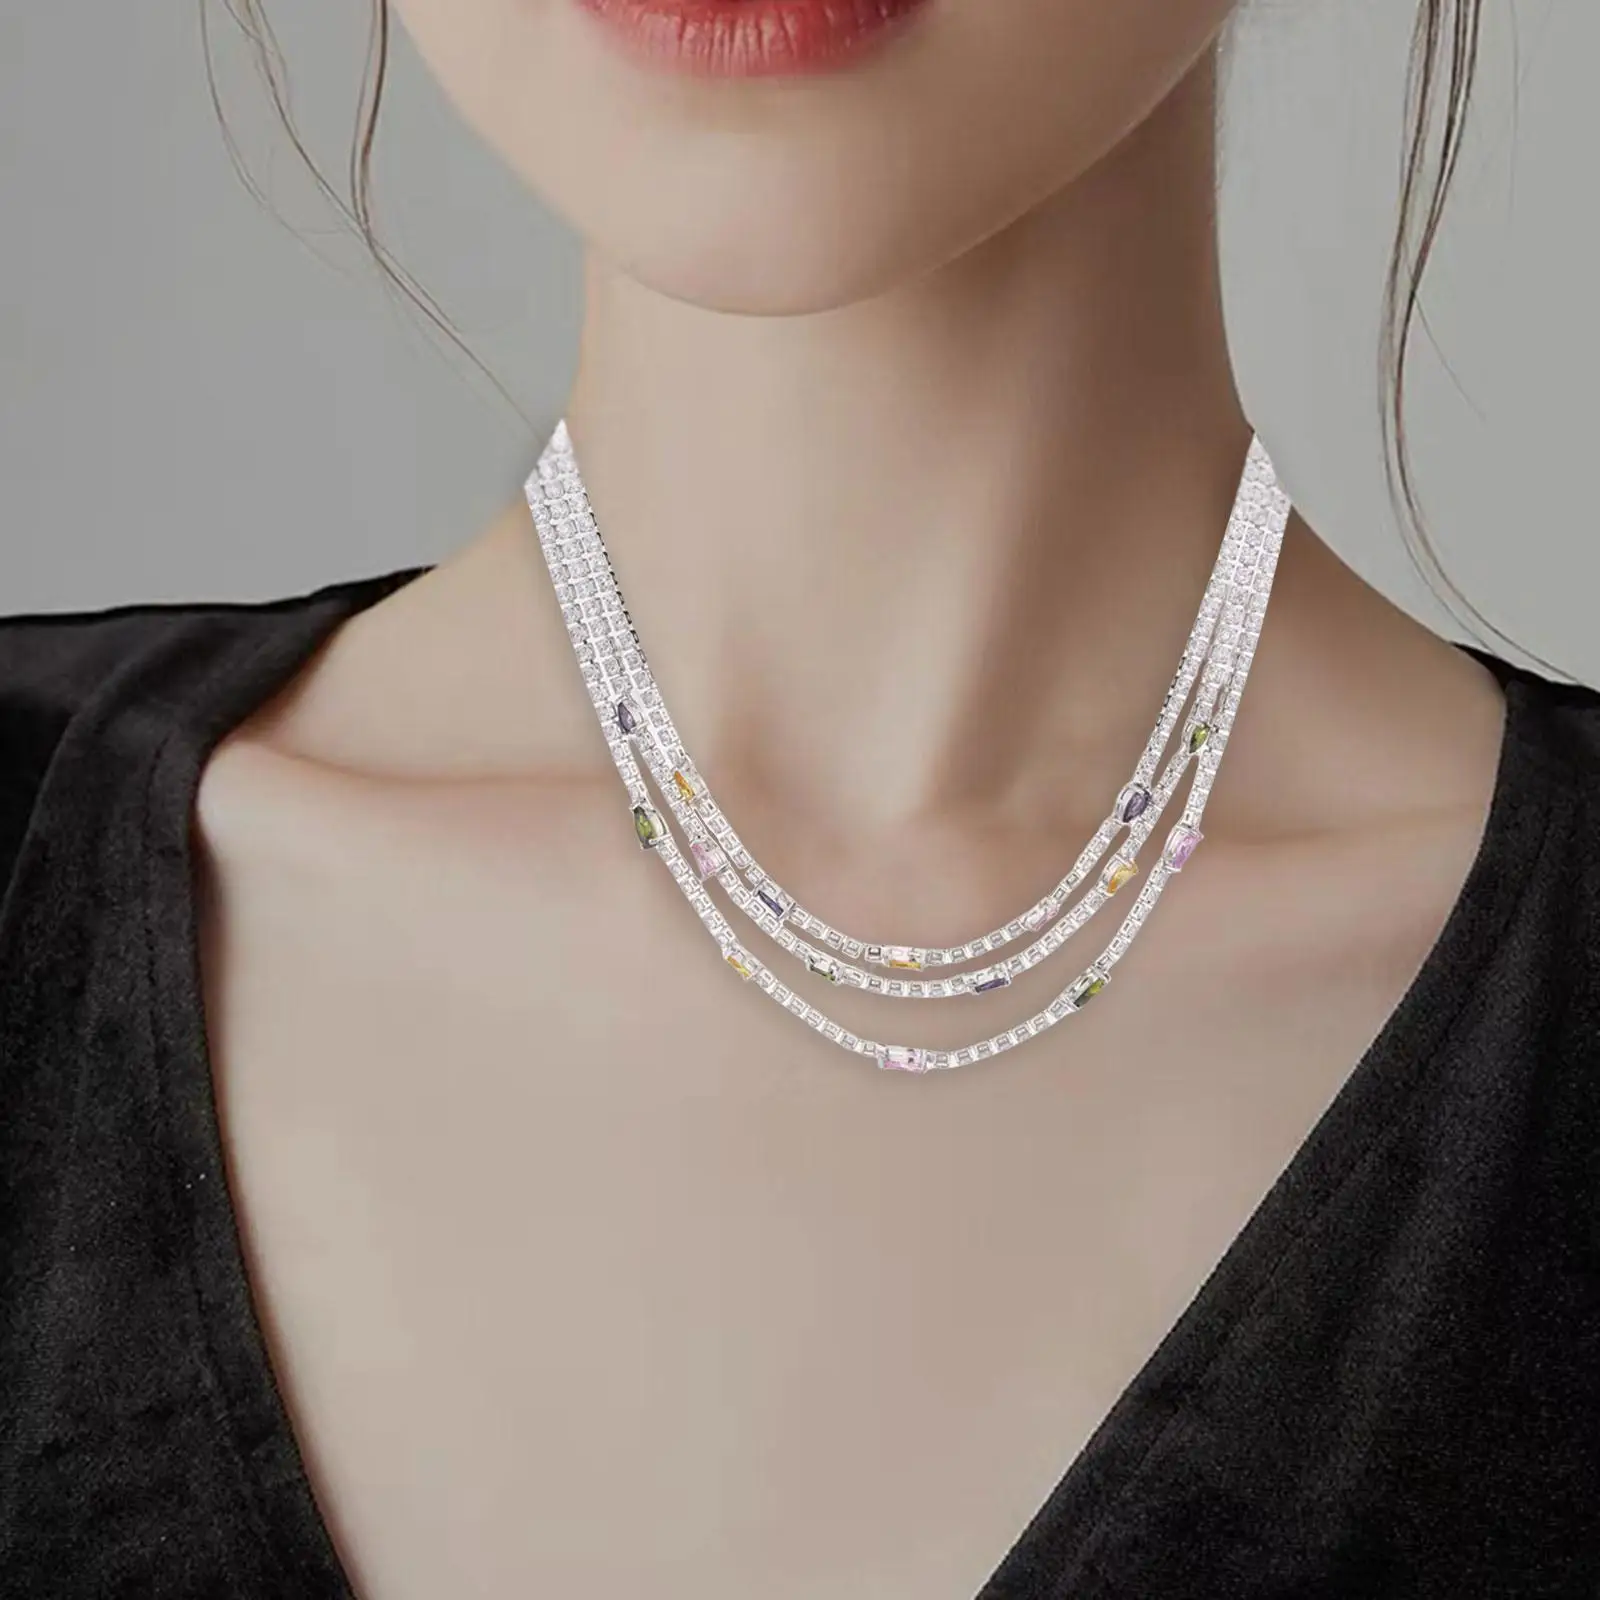 Lady Choker Necklace Bridal Jewelry Link Chain Adjustable fashion Layers Exquisite for Fancy Dress Engagement Birthday Costume